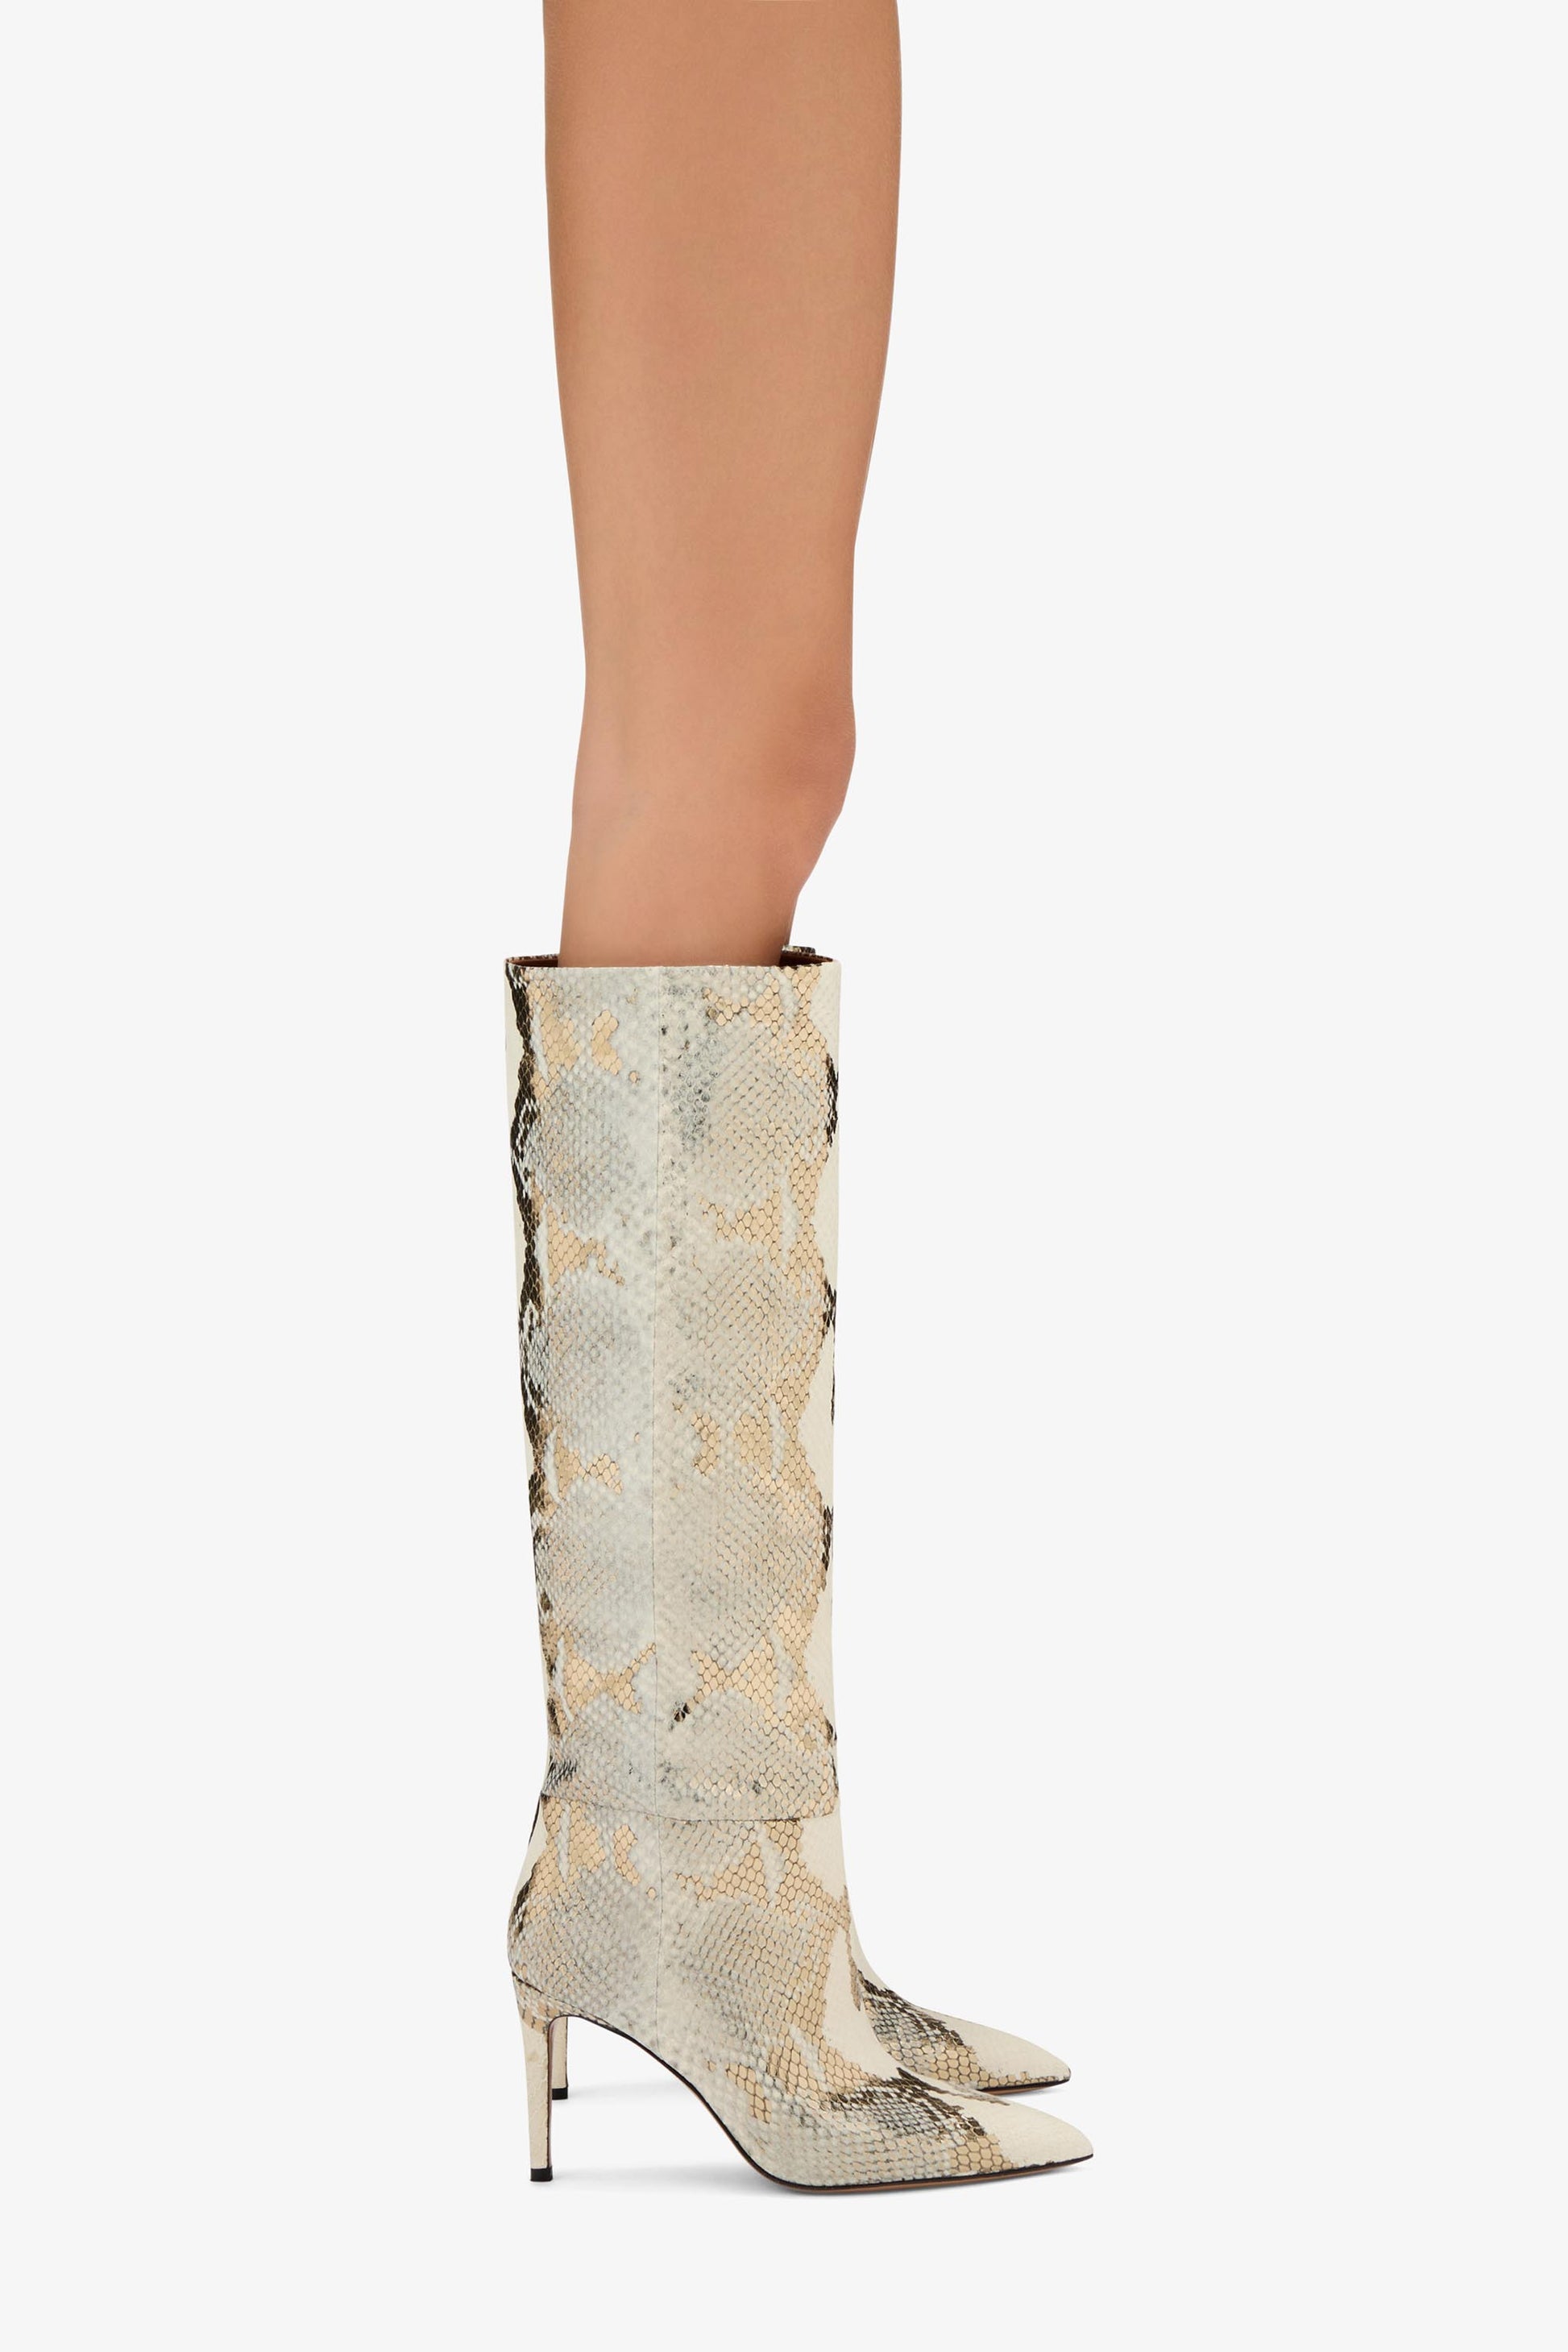 Rock python-effect leather boot - Product worn